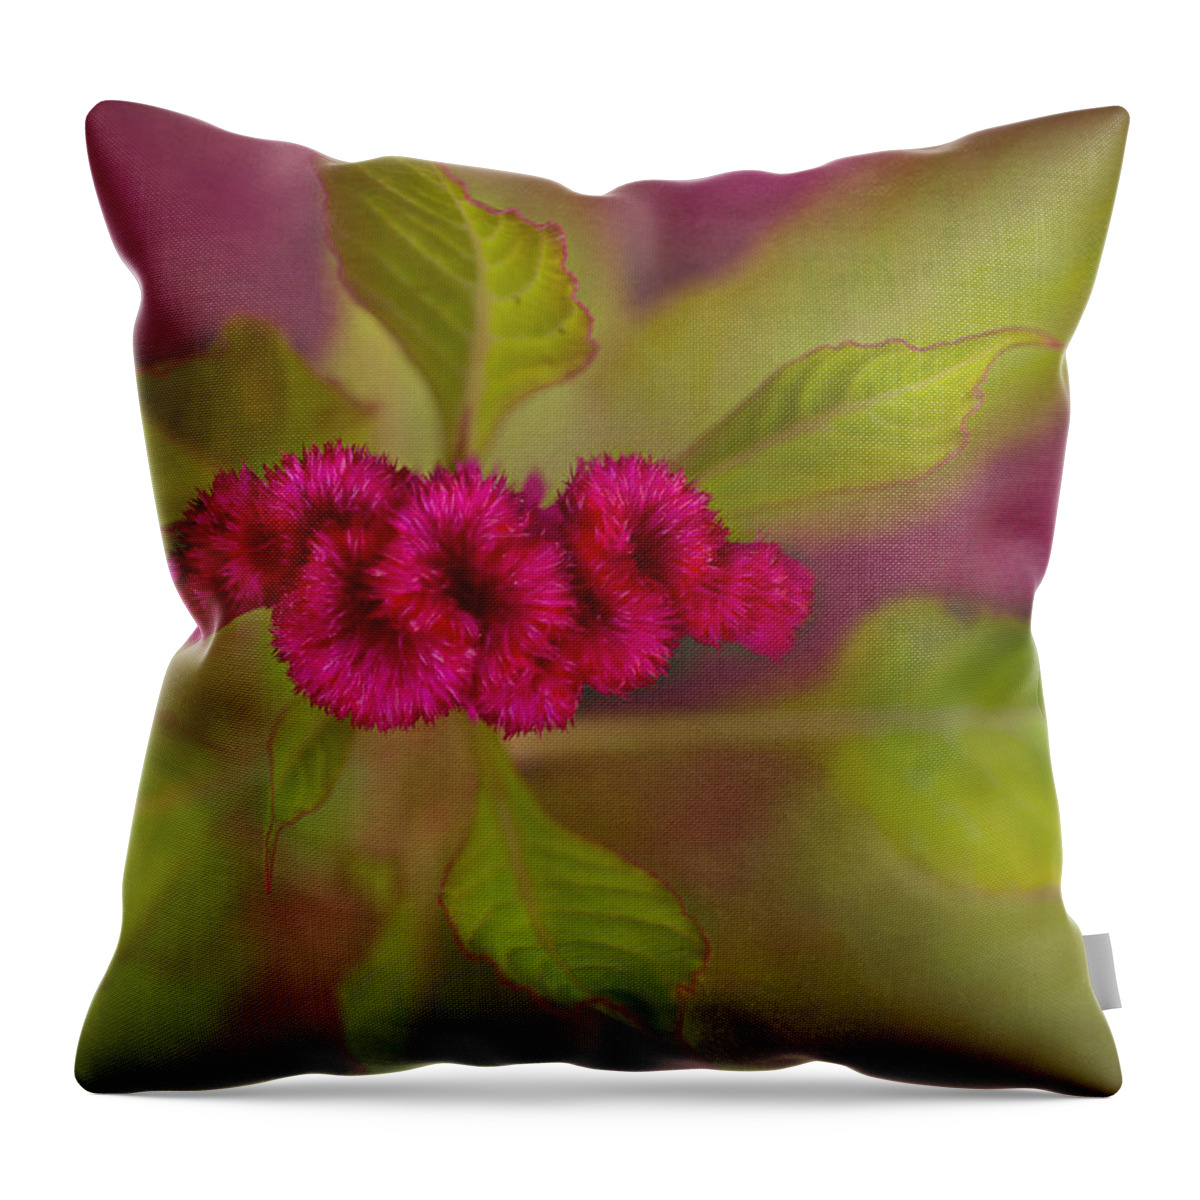 Plumed Cockscomb Flower Throw Pillow featuring the photograph Plumed Cockscomb by Marina Kojukhova